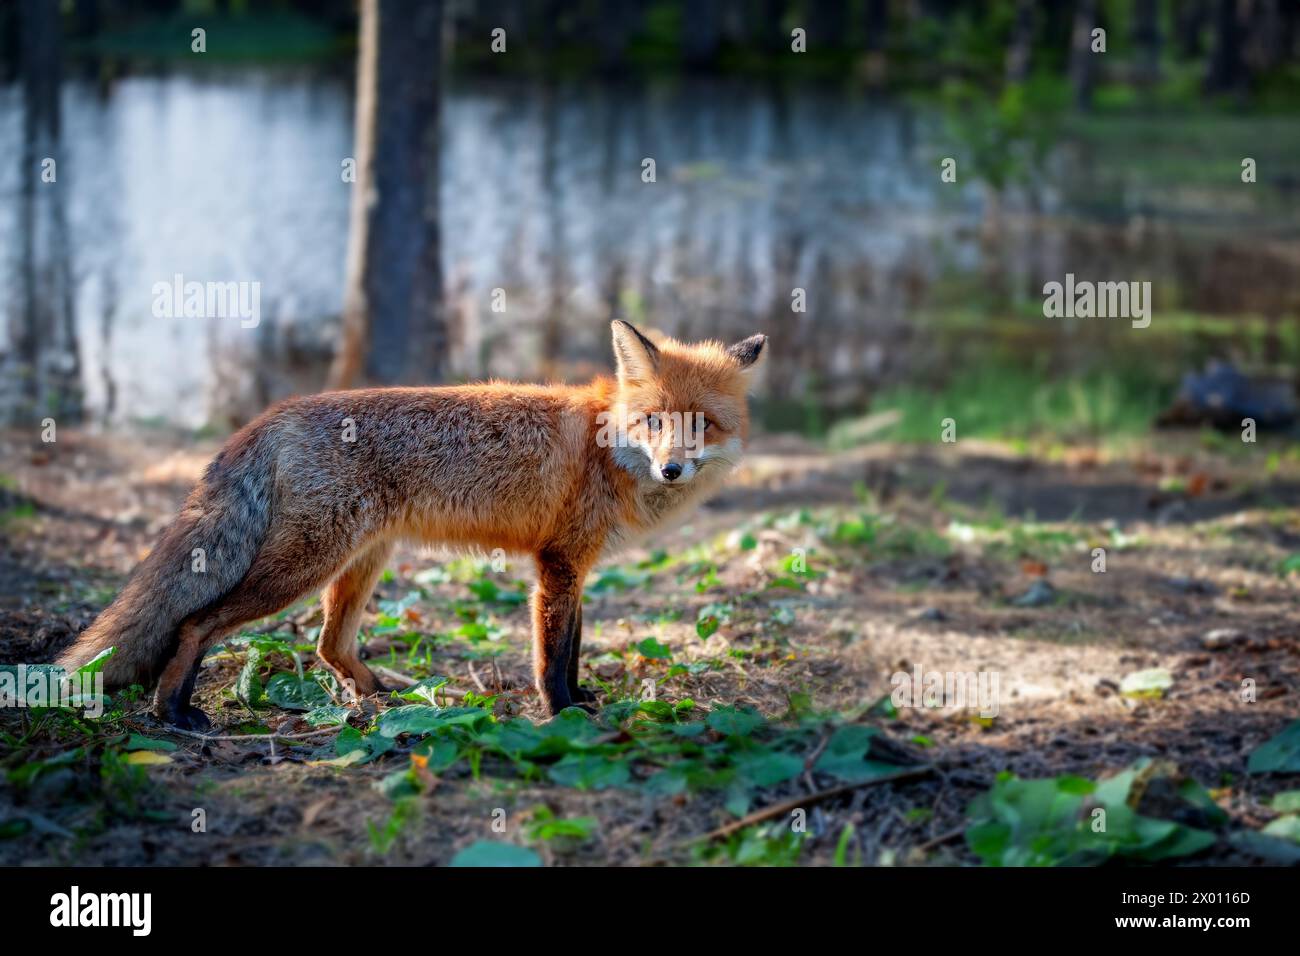 A red fox stands alert in a forest, next to a body of water. The foxs striking red fur stands out against the green foliage as it observes its surroun Stock Photo